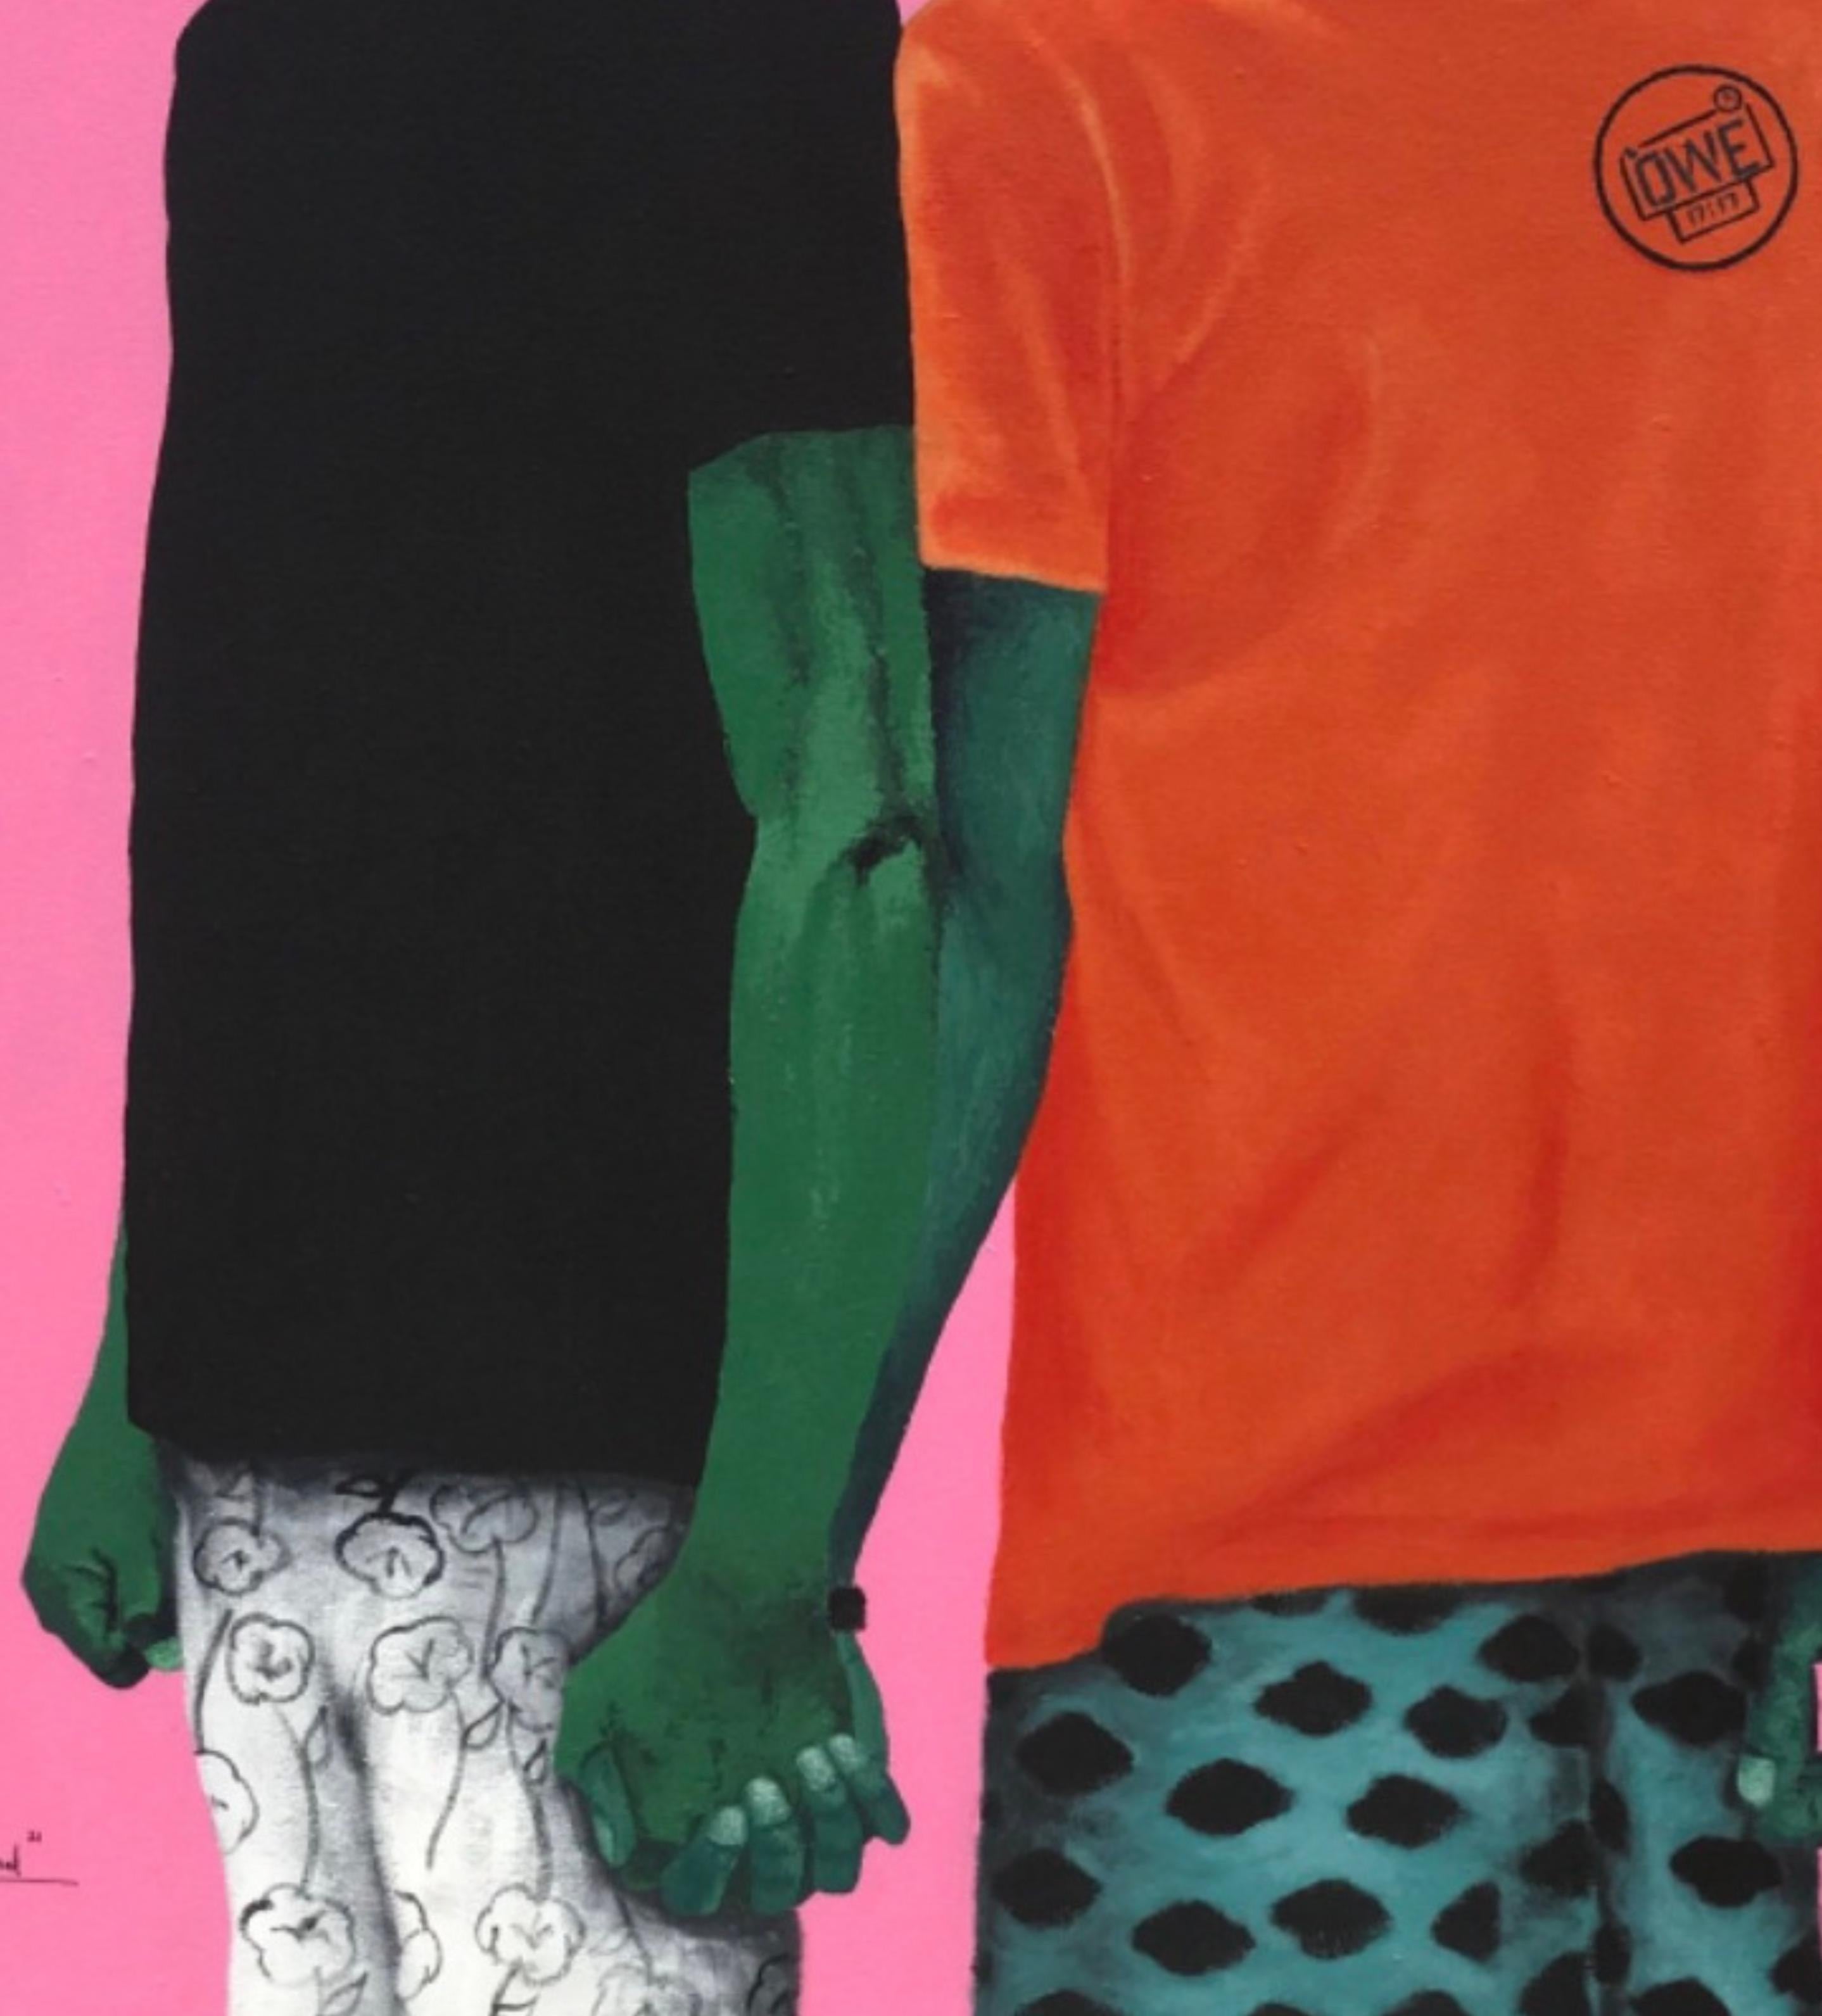 Brother's Keeper - Contemporary Painting by Emmanuel Aderiye